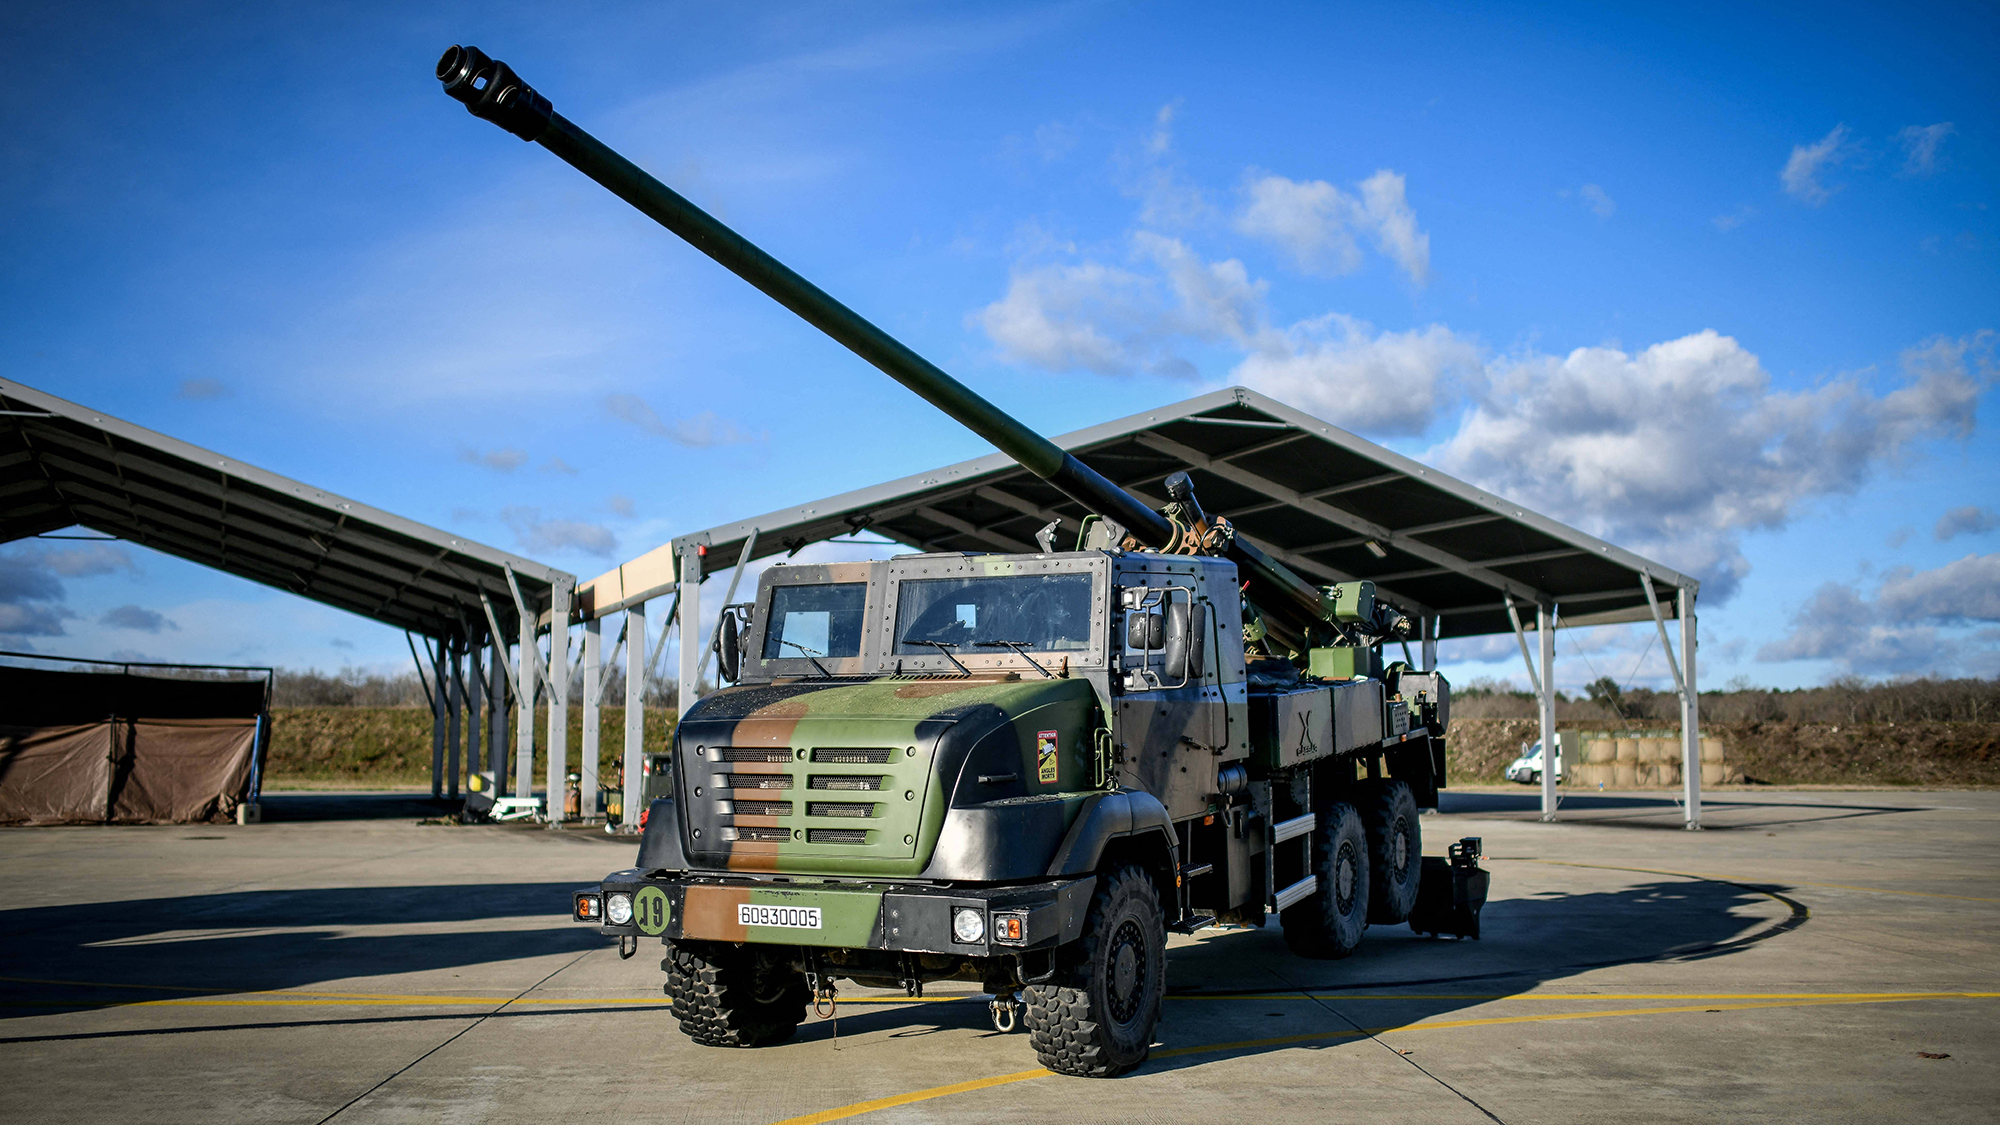 A Caesar self-propelled howitzer at military base 118 in Mon-de-Marsan, France, on January 20.